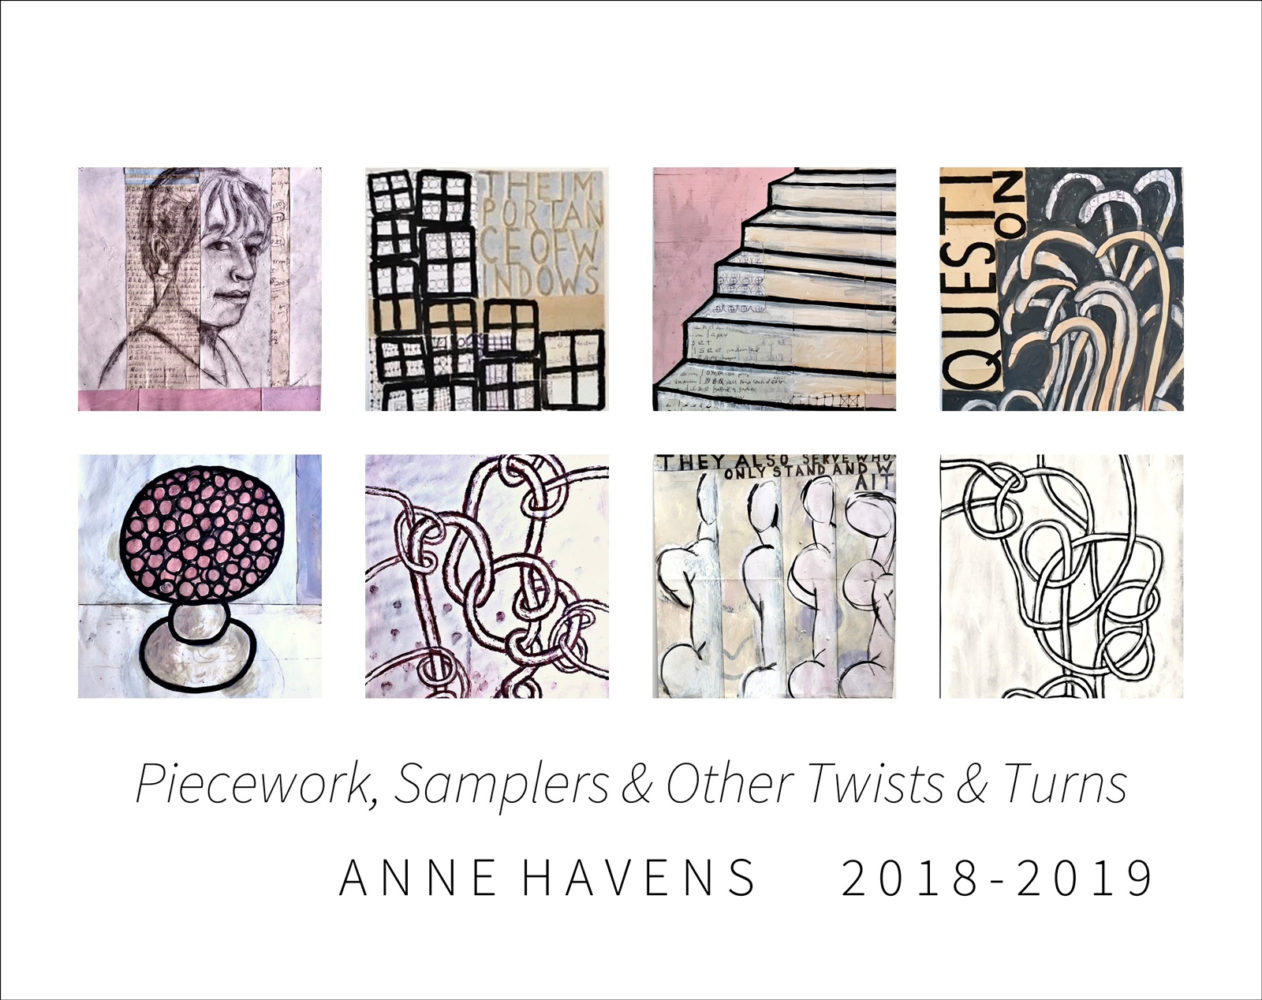 Cover of Anne Havens "Piecework, Samplers & Other Twists & Turns" 2018 - 2019